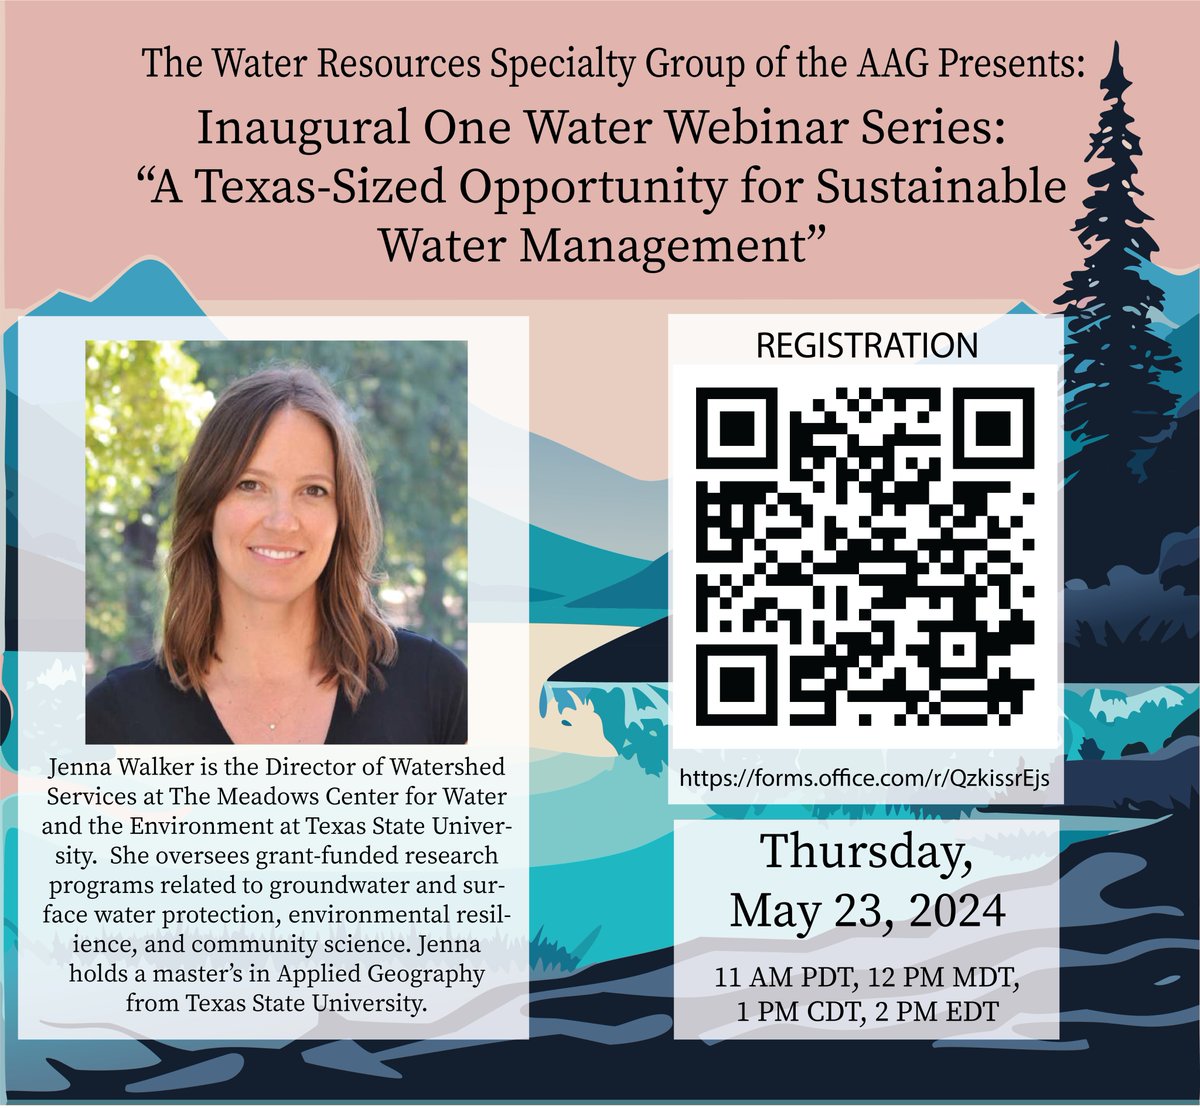 Interested in #OneWater & sustainable water mgmt? Register to join @theAAG's Water Resources Specialty Group on 5/23 for a FREE webinar feat. #MC4Water’s Jenna Walker, discussing “A Texas-Sized Opportunity for Sustainable Water Management.” RSVP: forms.office.com/r/QzkissrEjs